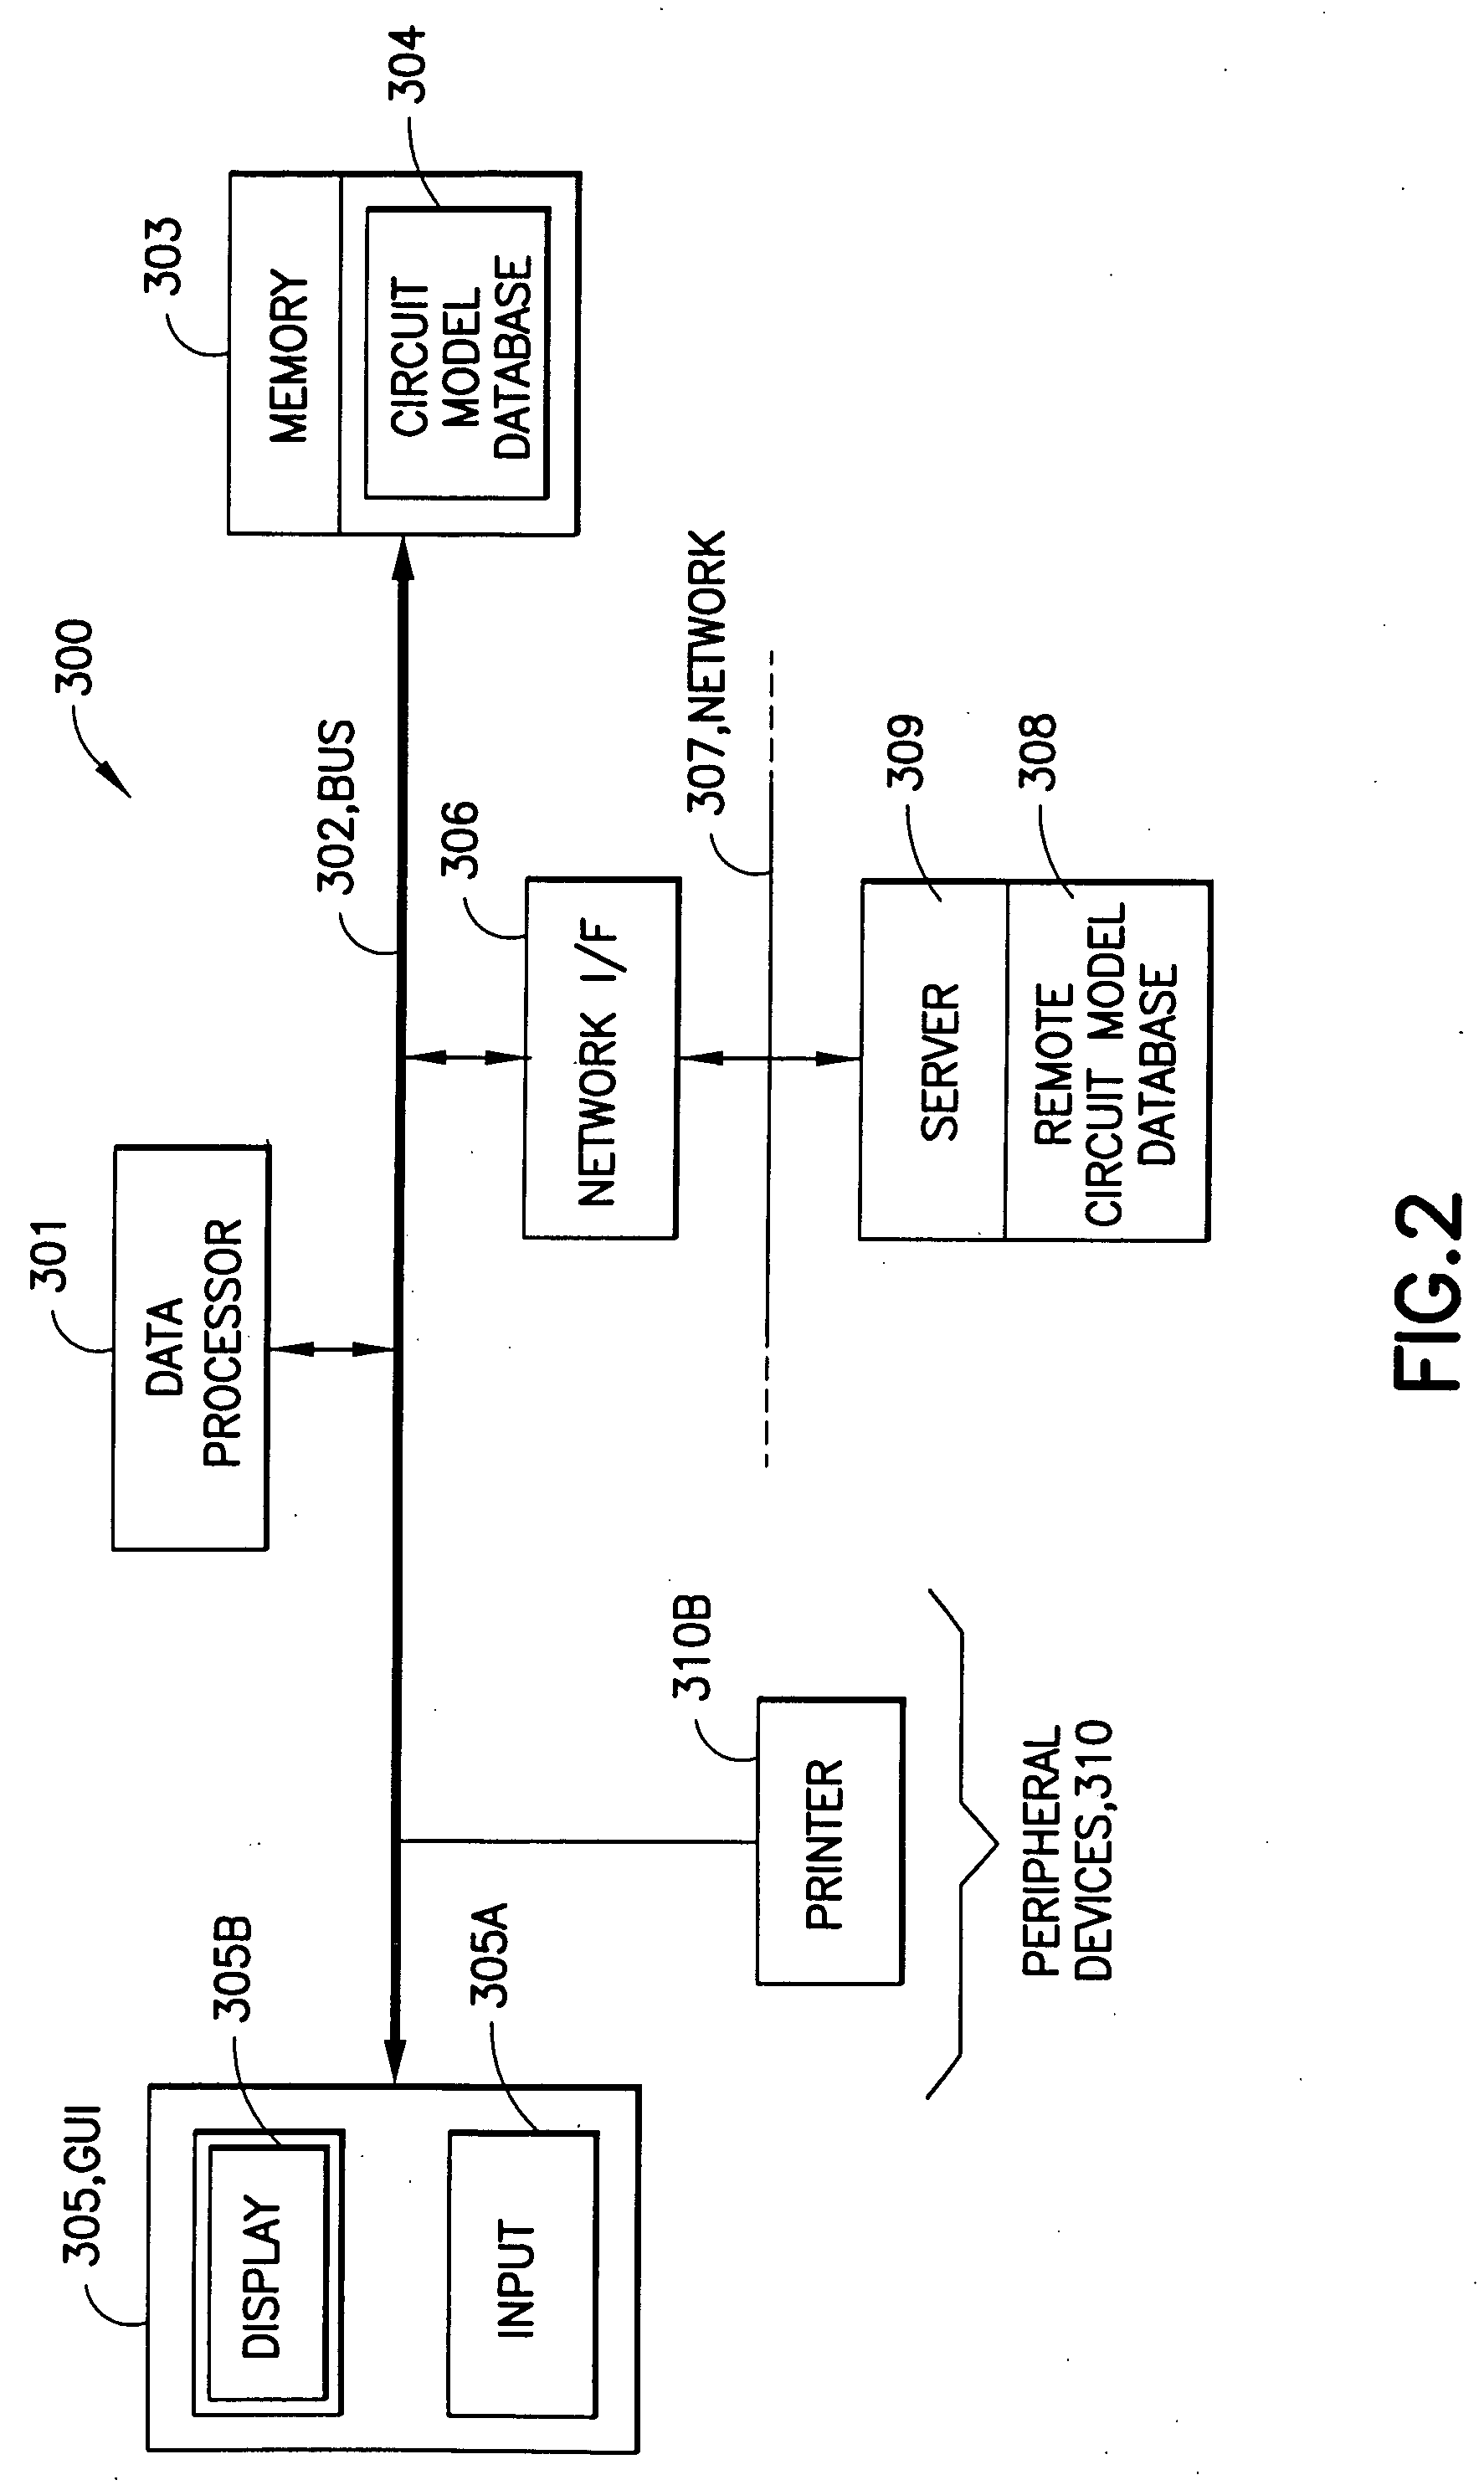 System and method for efficient model order reduction in electric and electronic circuit design